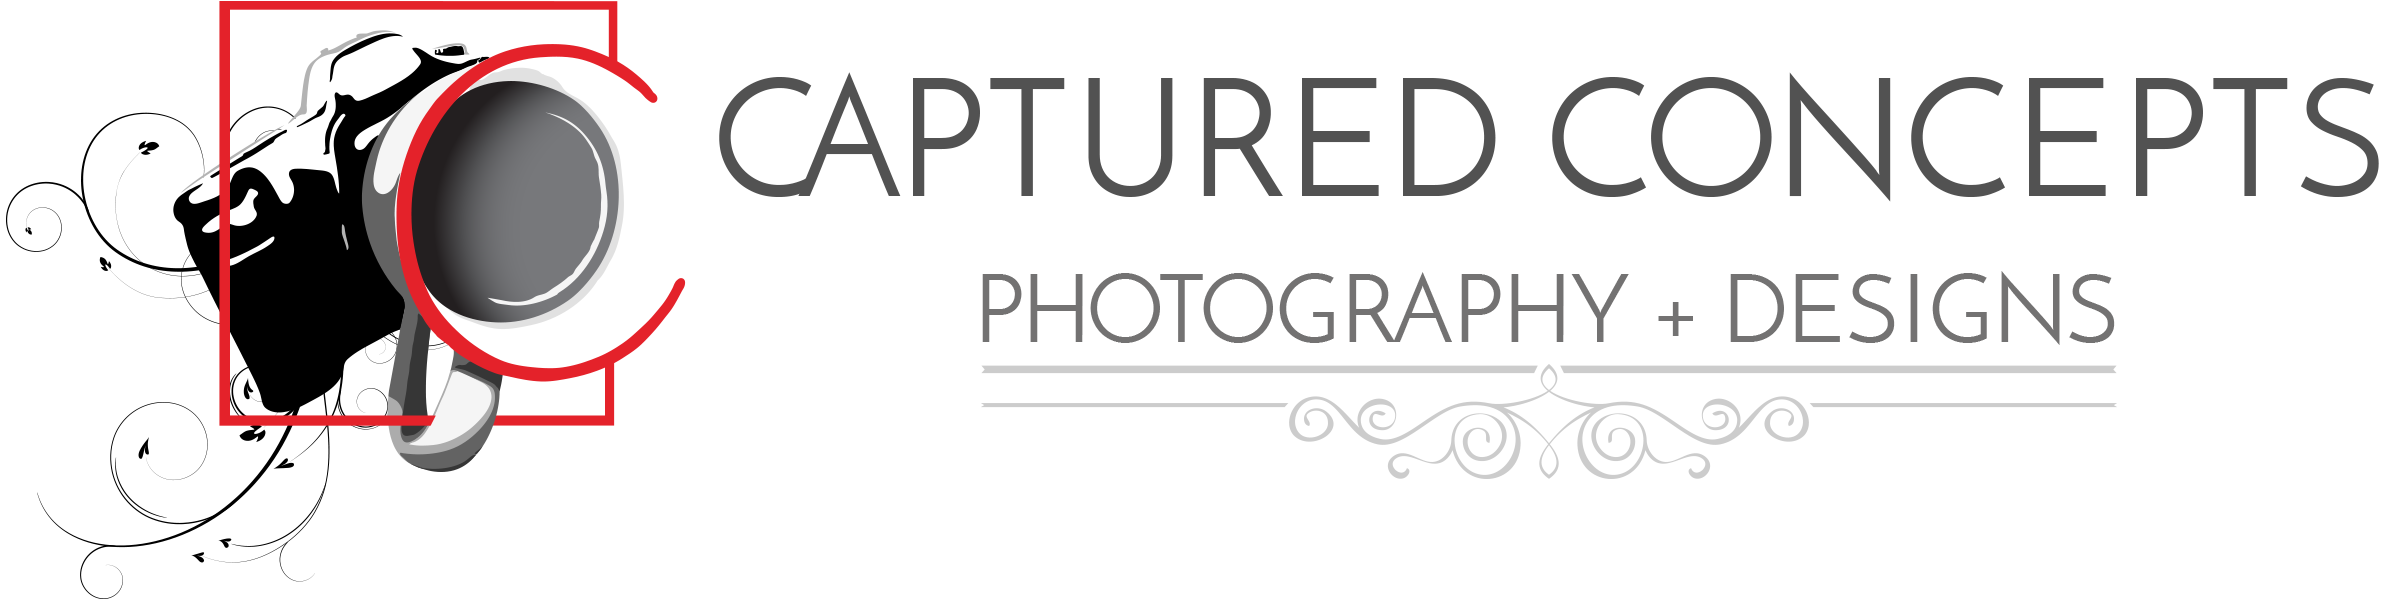 Captured Concepts :: photography + designs